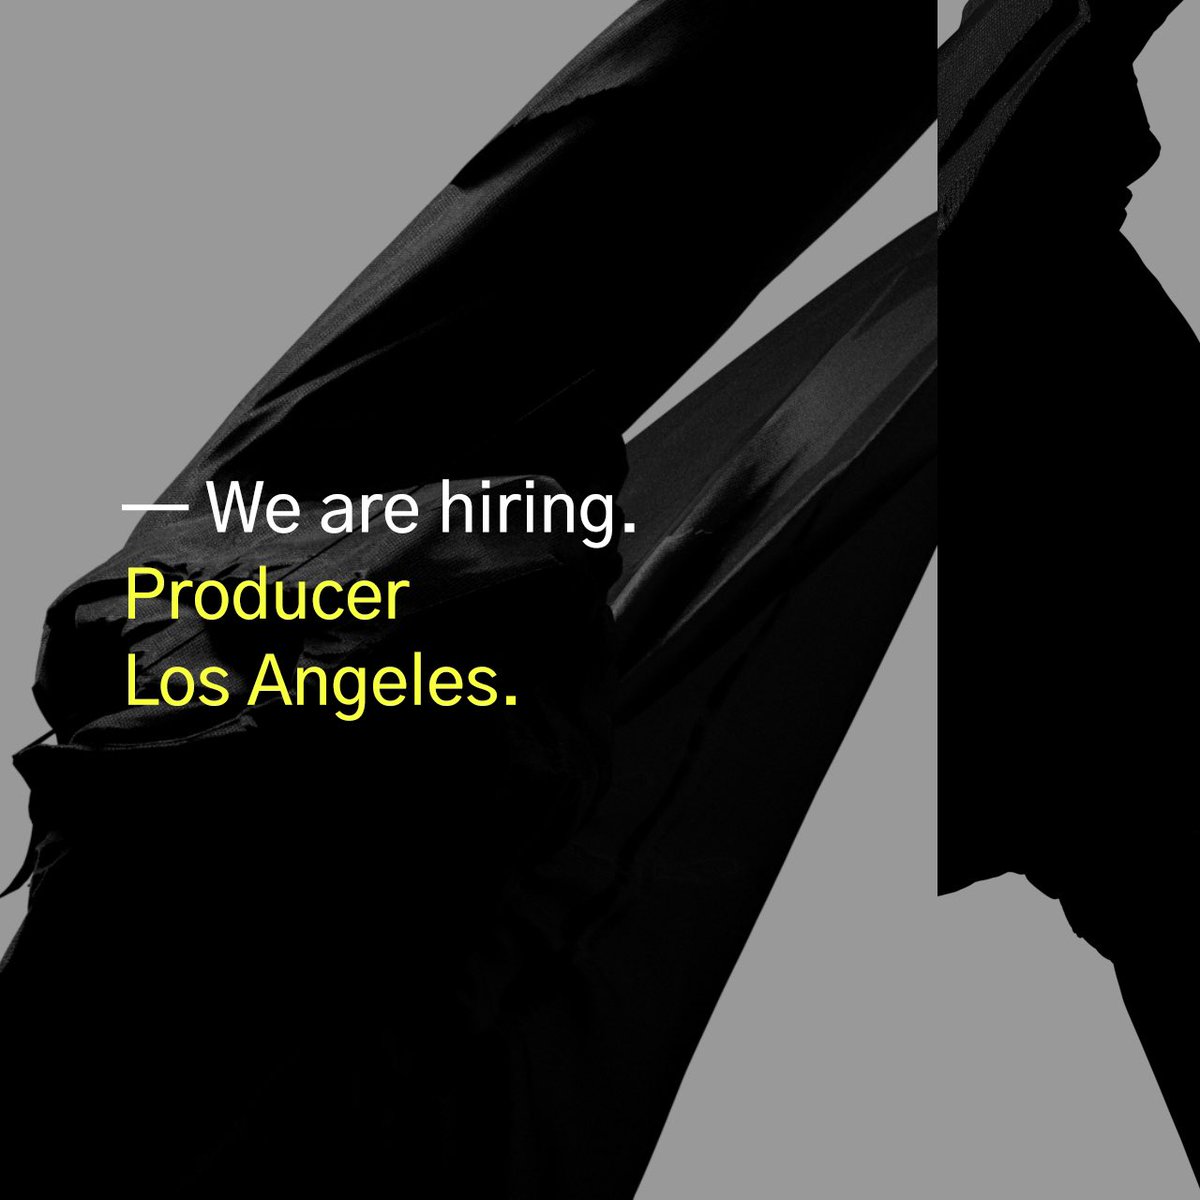 Our LA studio is hiring. We are in need of a dedicated and enthusiastic producer to join our growing team. Applicants must be organized and proactive. Being based in LA is preferable but not essential. For more information please email talent.la@futuredeluxe.com